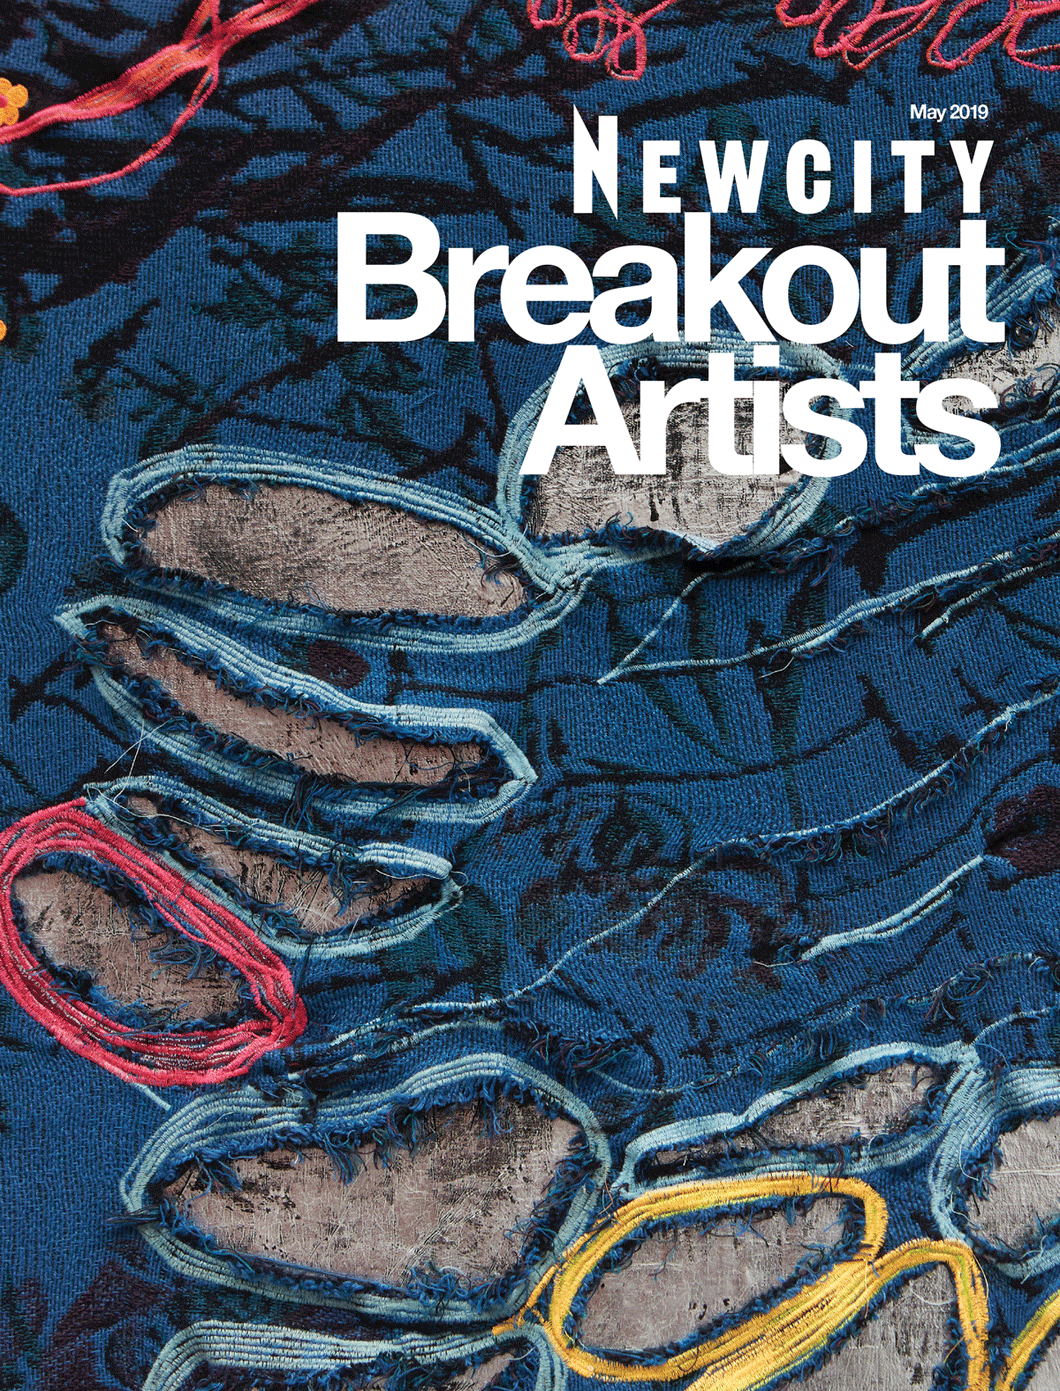 May 2019 Issue: Breakout Artists